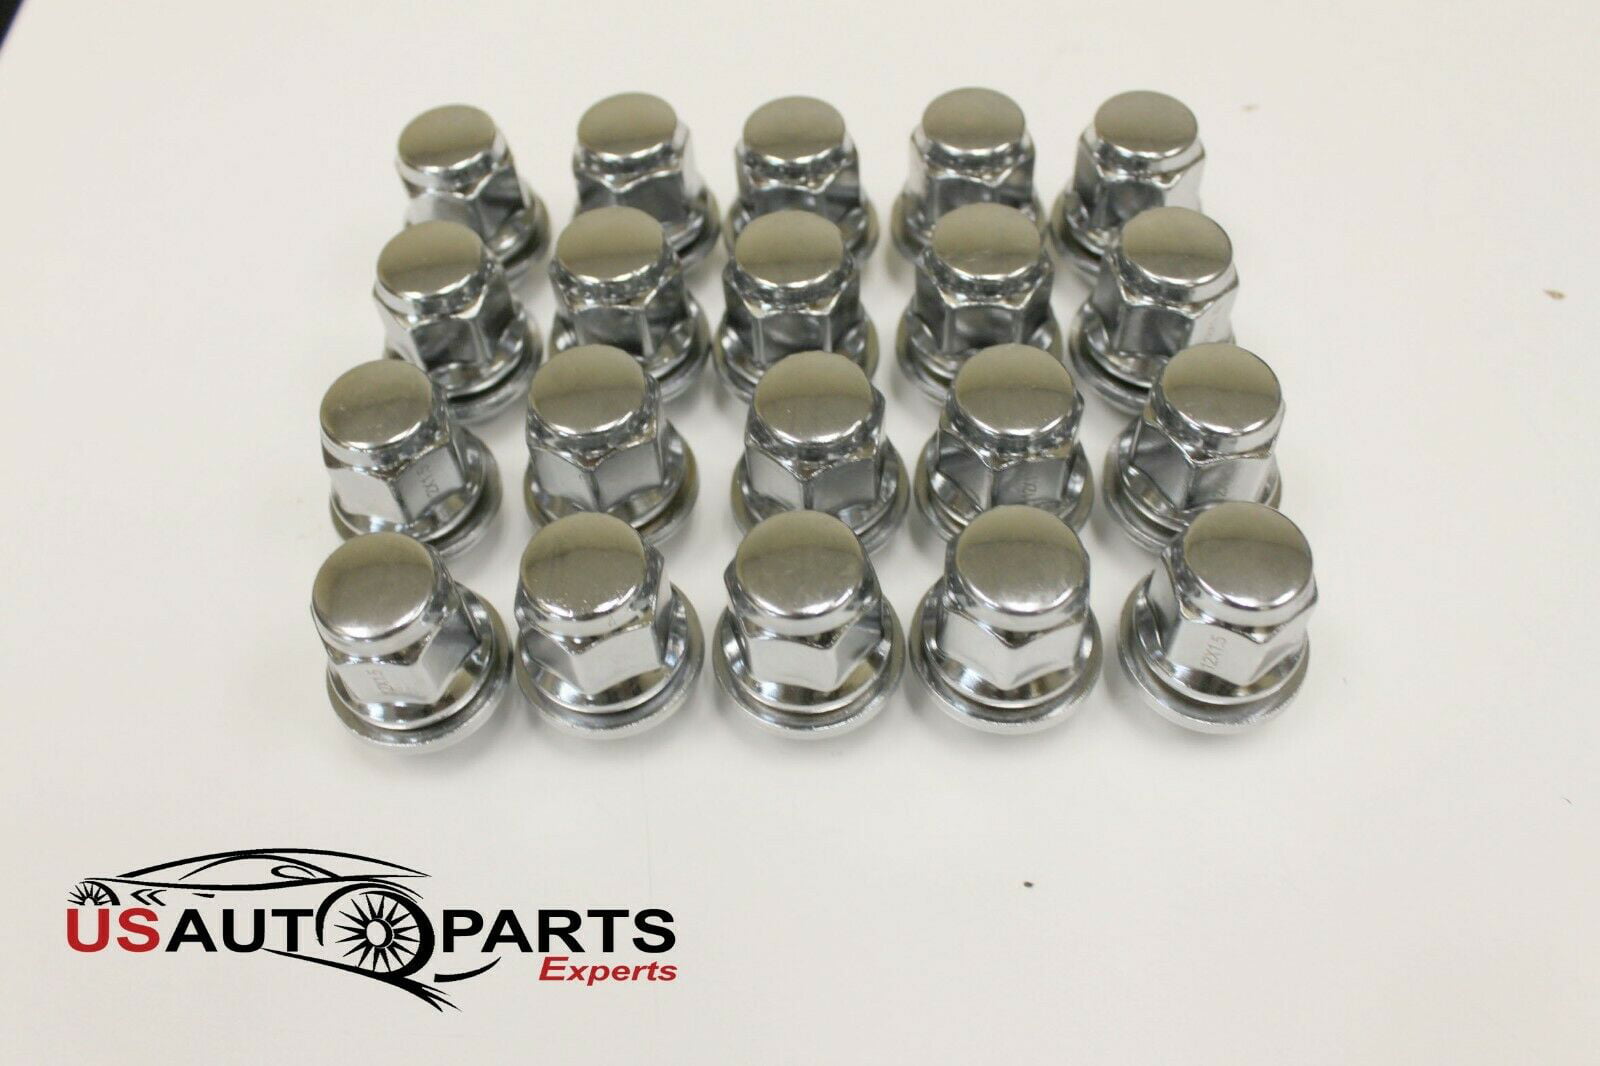 20 Chrome 12x1.5 Wheel Lug Nuts Mag Seat Washer for Lexus Scion Toyota Camry US 